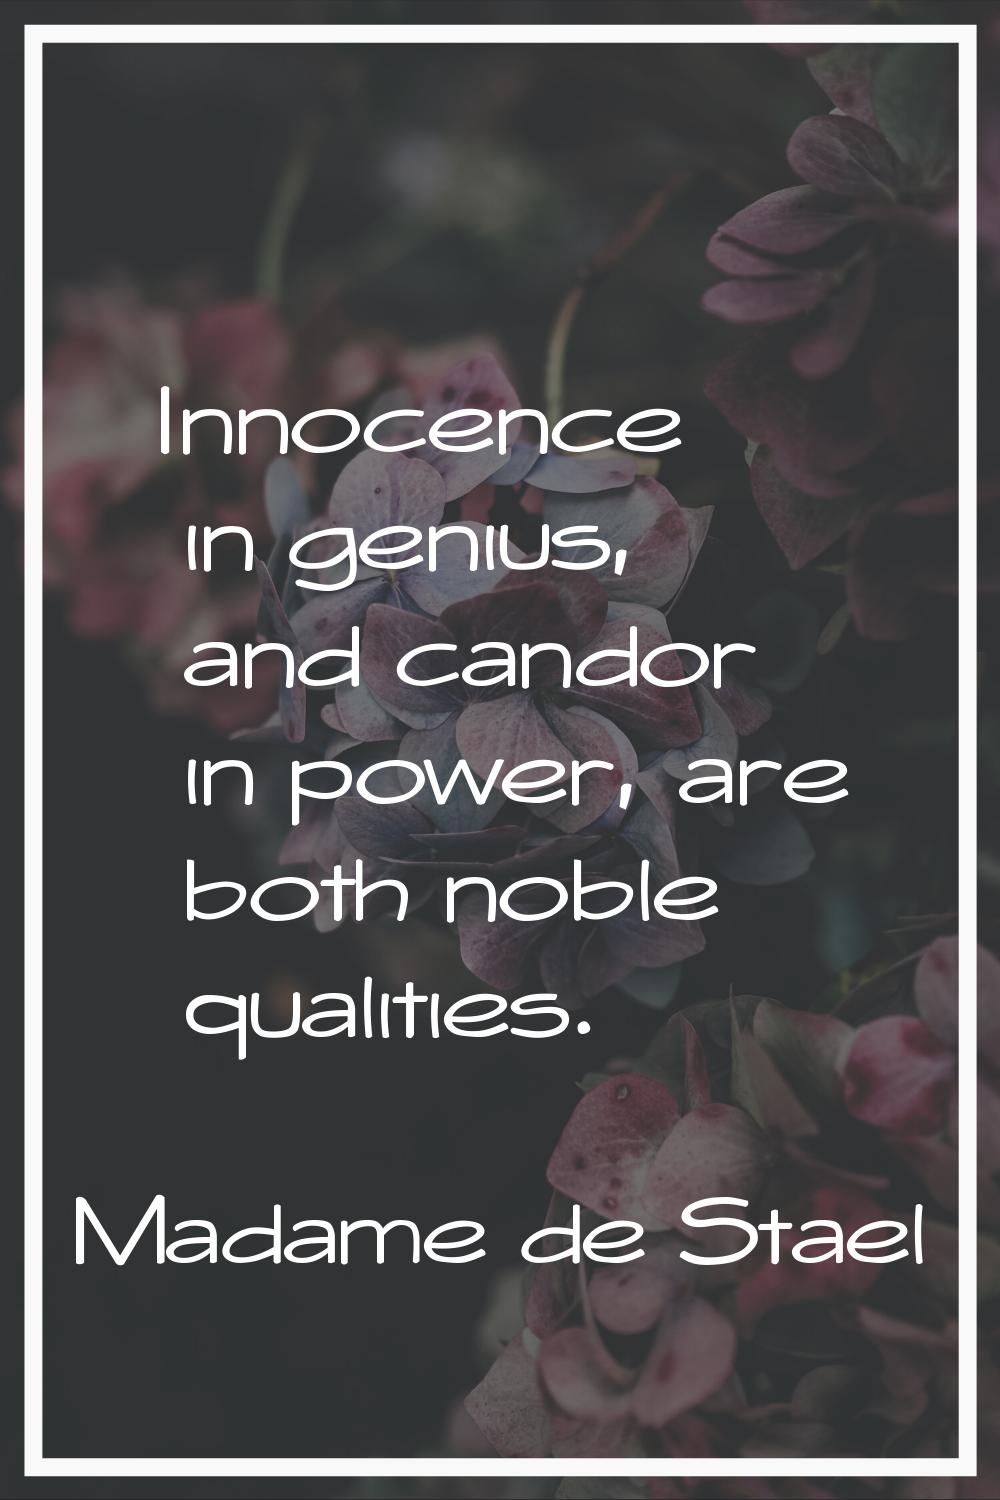 Innocence in genius, and candor in power, are both noble qualities.